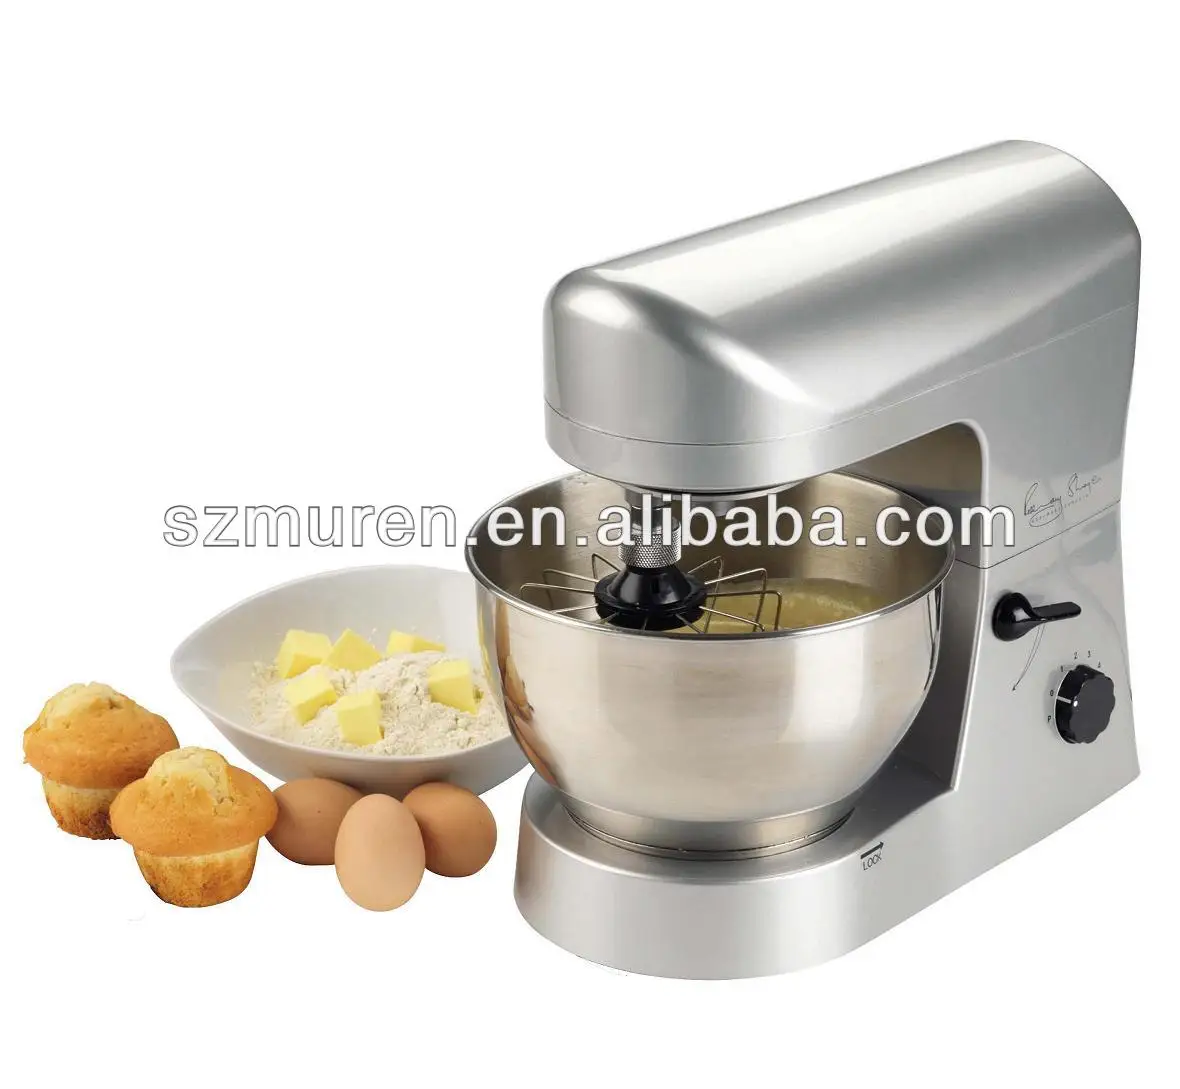 1200W powerful electric mini kitchen food mixer with full metal gear system